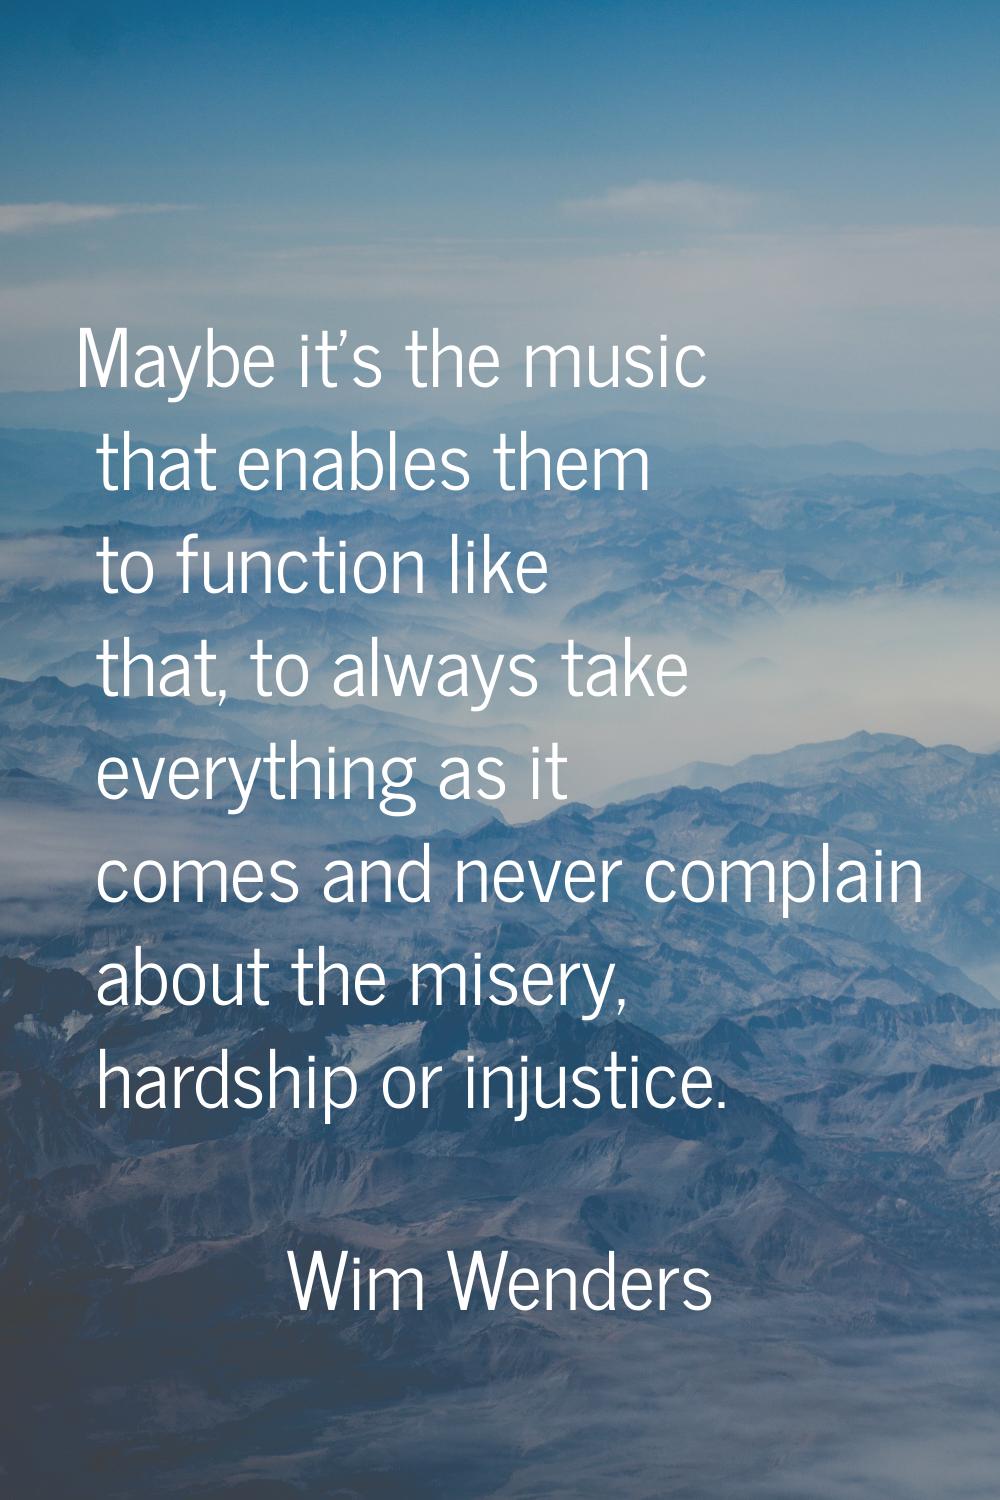 Maybe it's the music that enables them to function like that, to always take everything as it comes